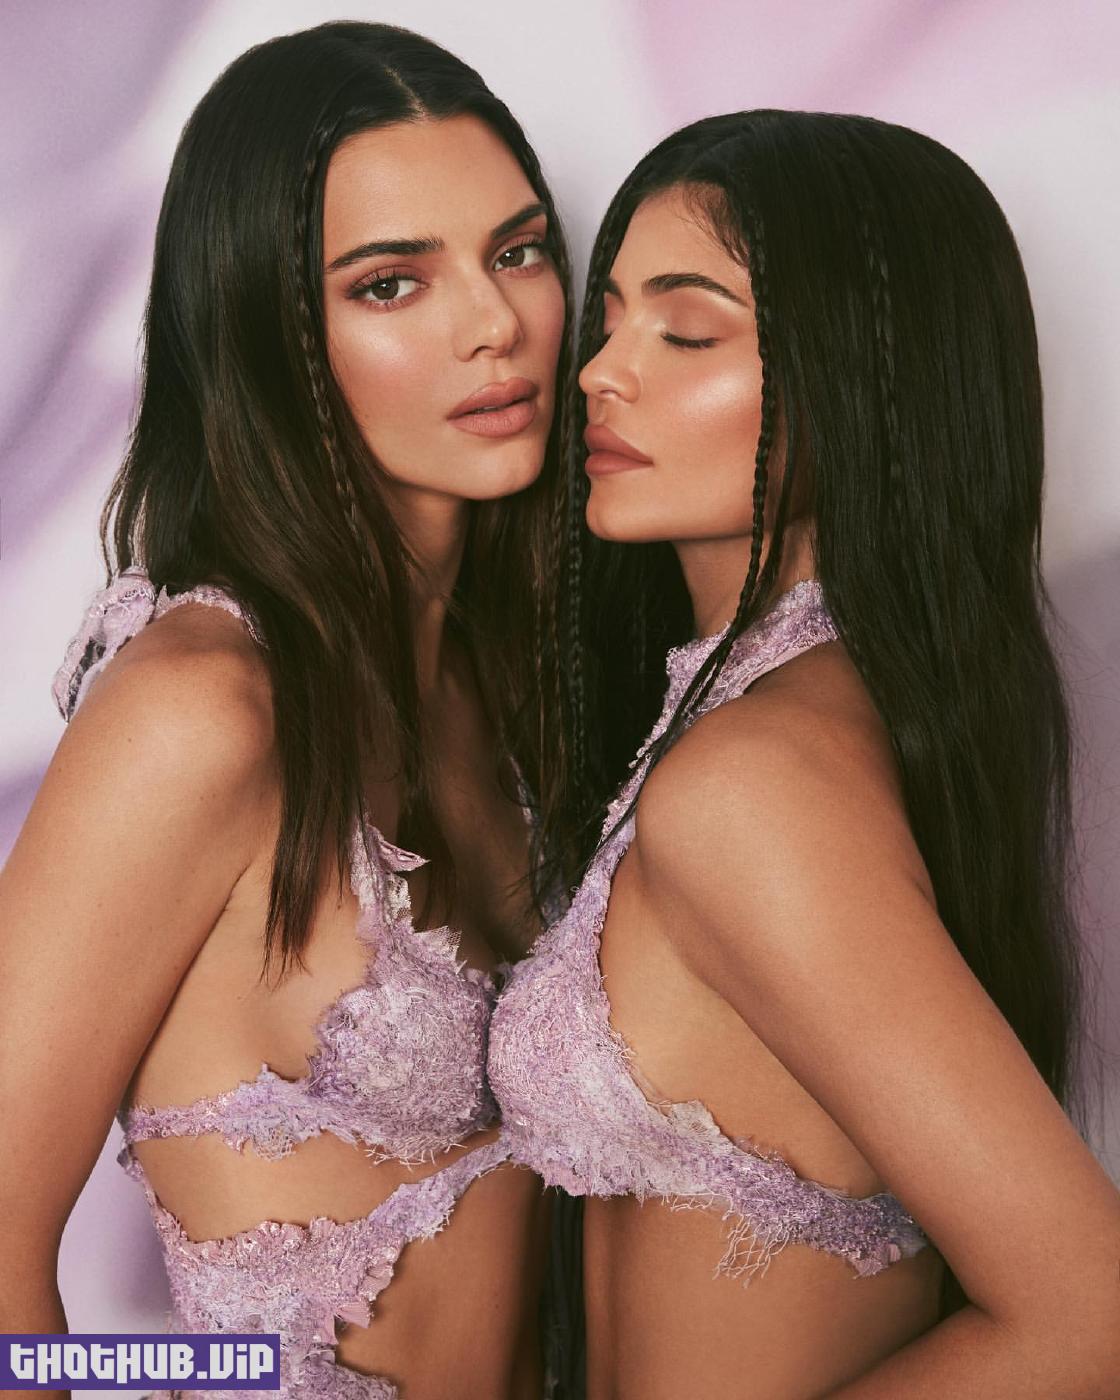 1662431296 582 Kendall And Kylie Jenner Modeling Photoshoot Set Leaked